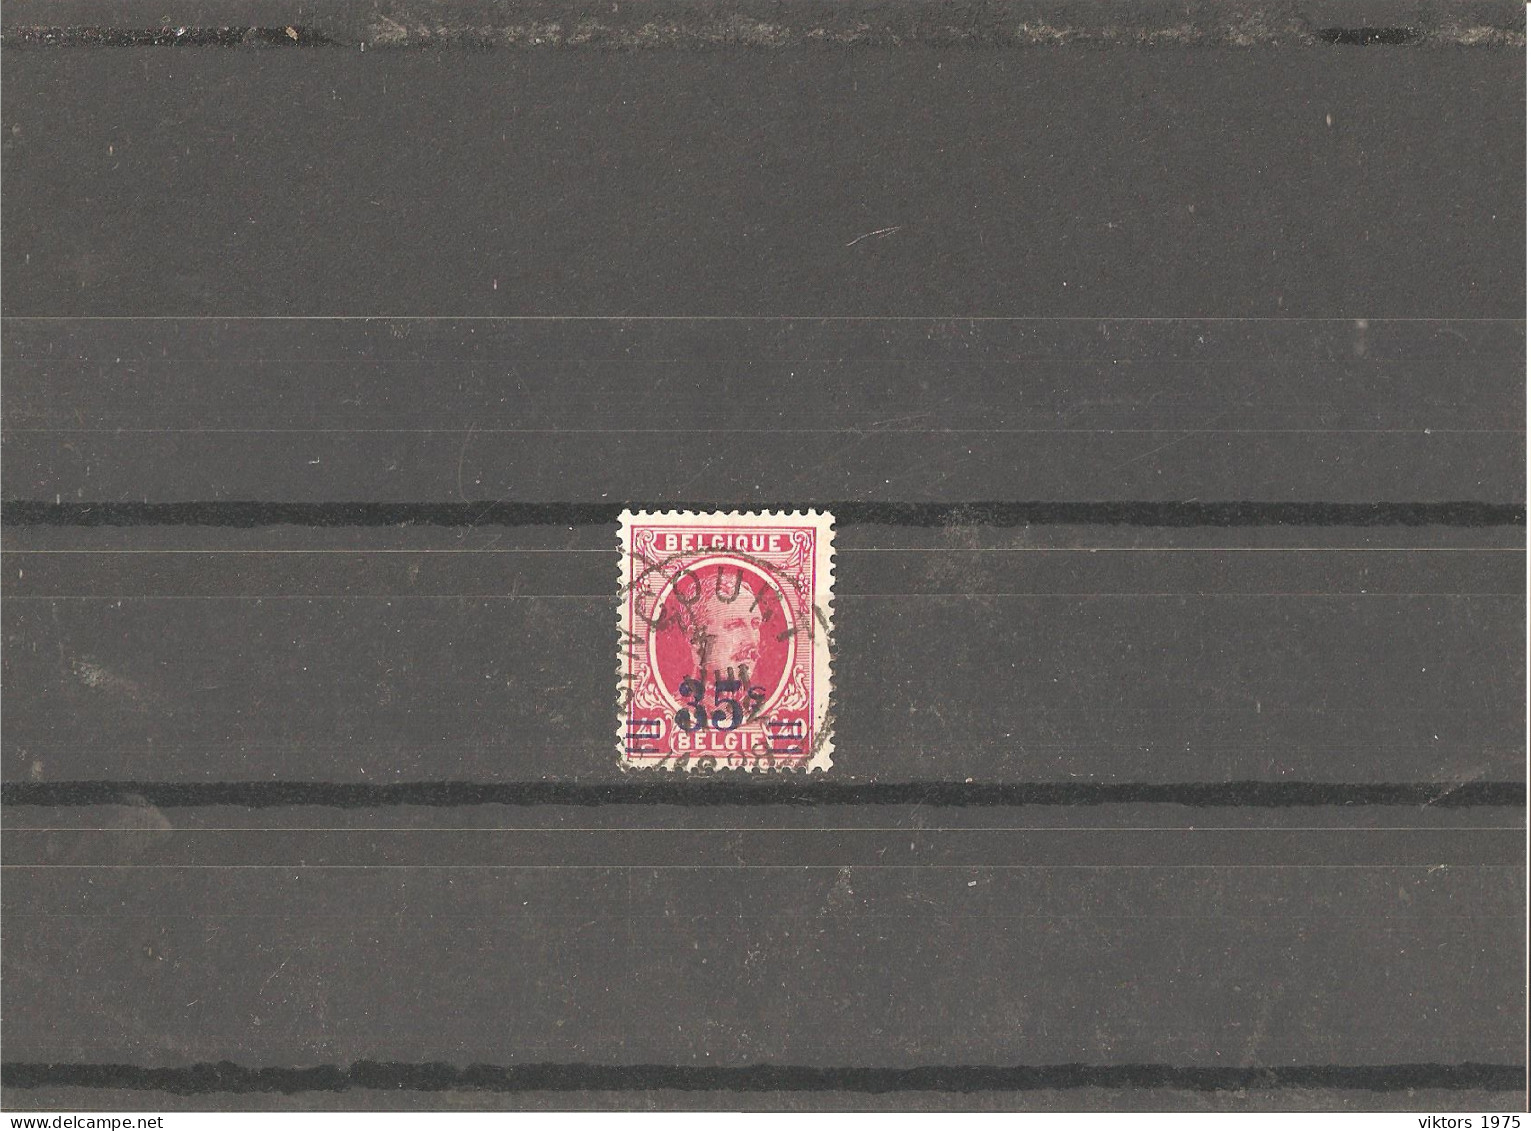 Used Stamp Nr.225 In MICHEL Catalog - Used Stamps